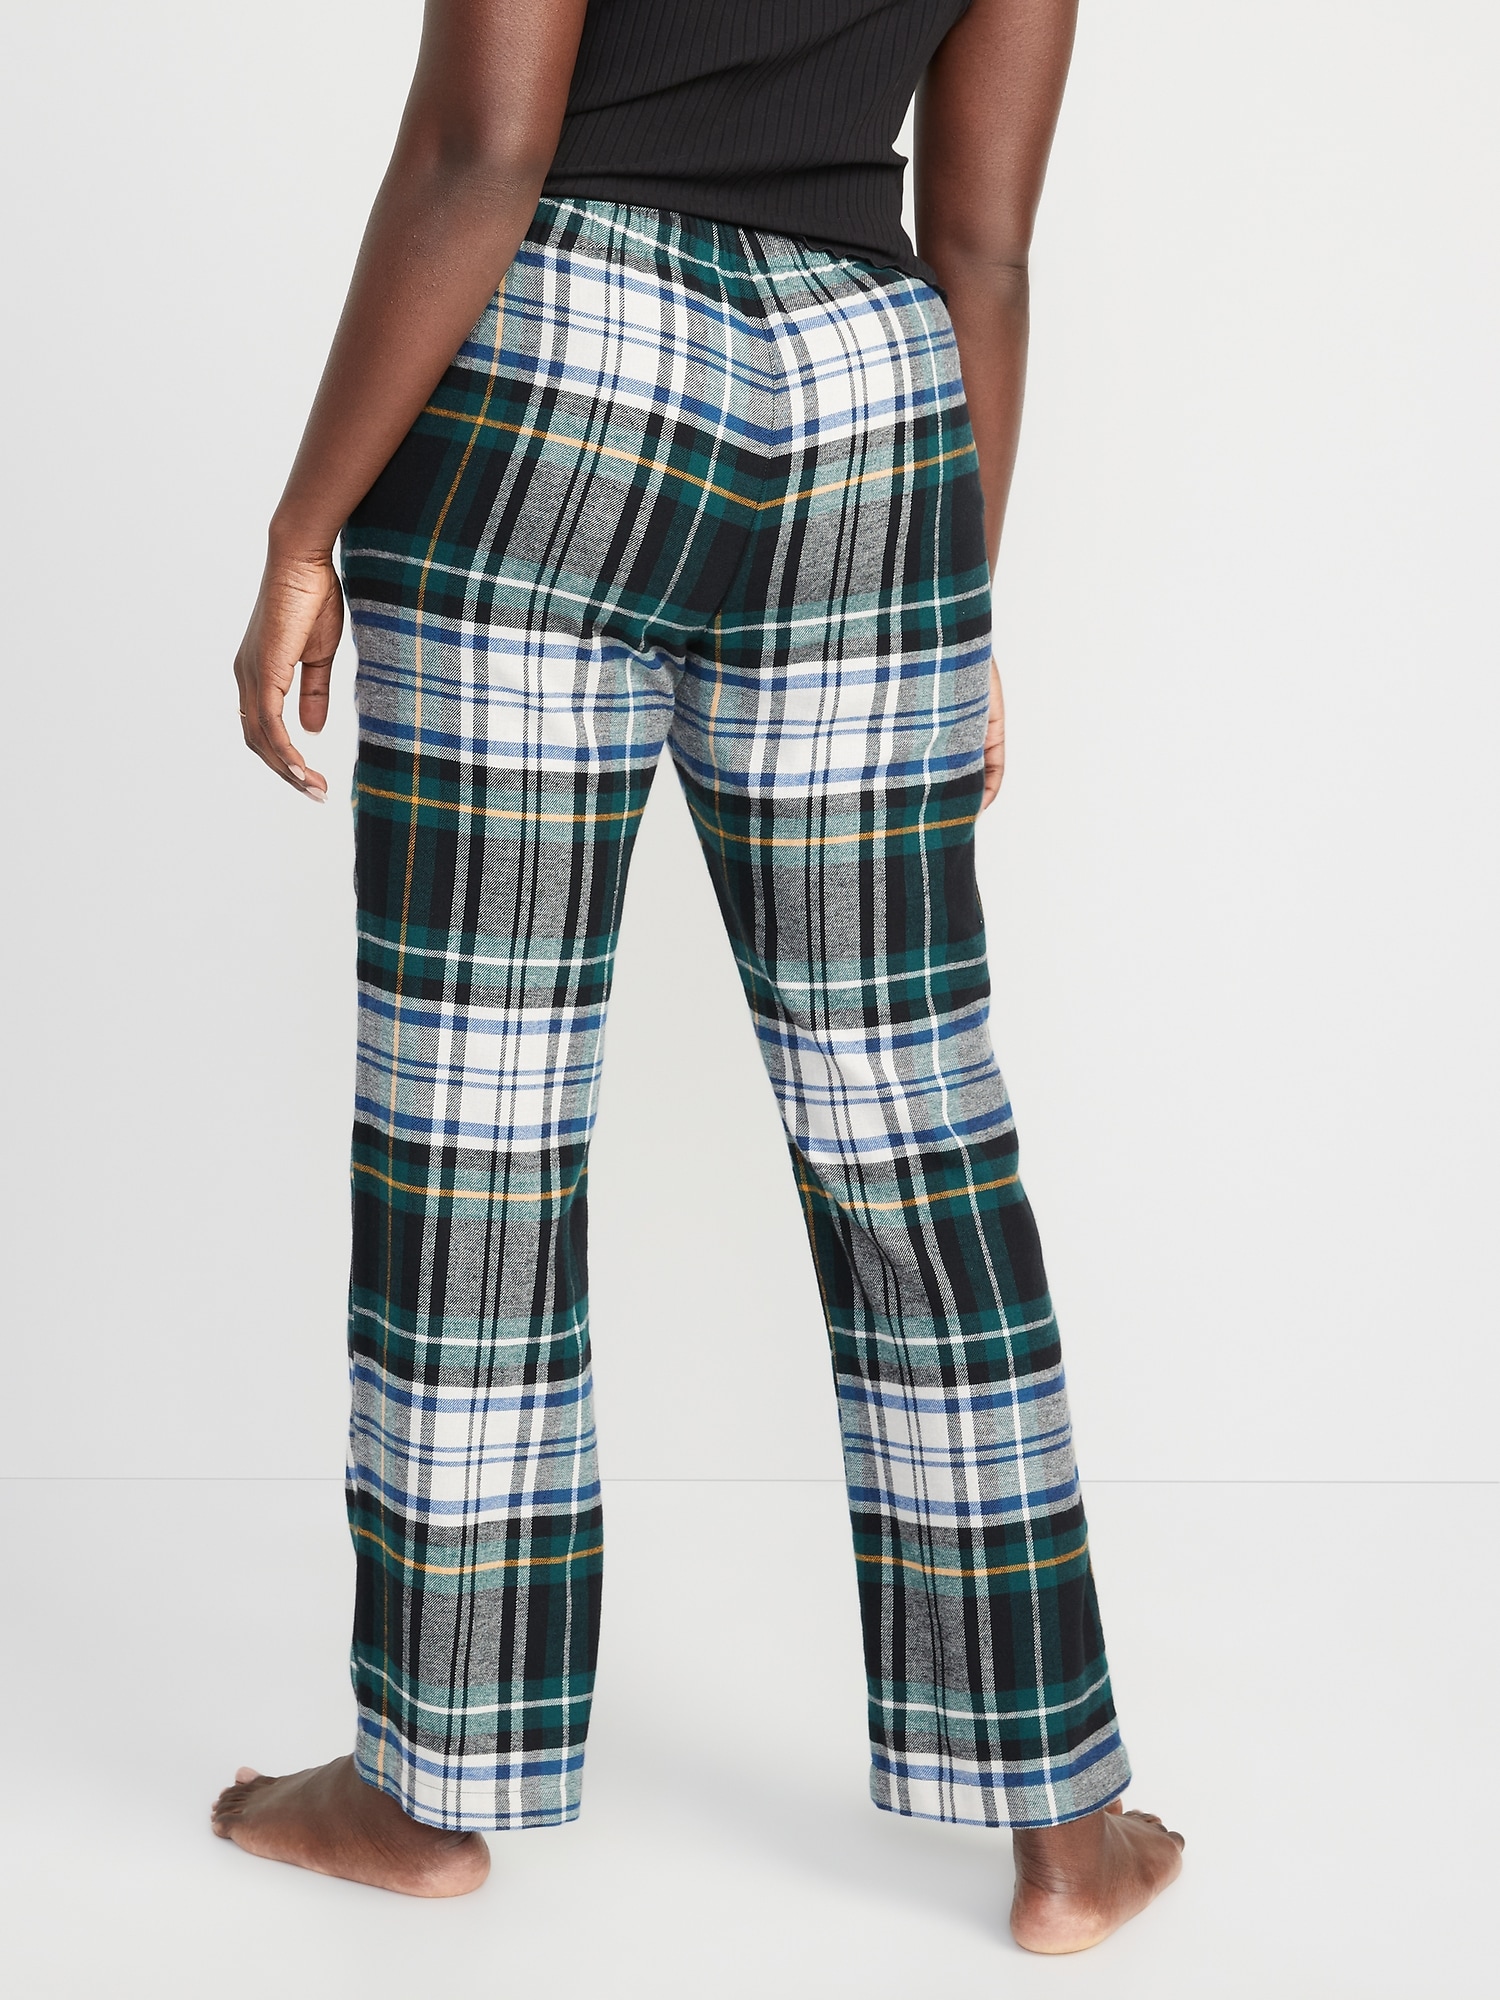 zimmerli Pajama pants COZY FLANNELL made of flannel in dark blue/ brown